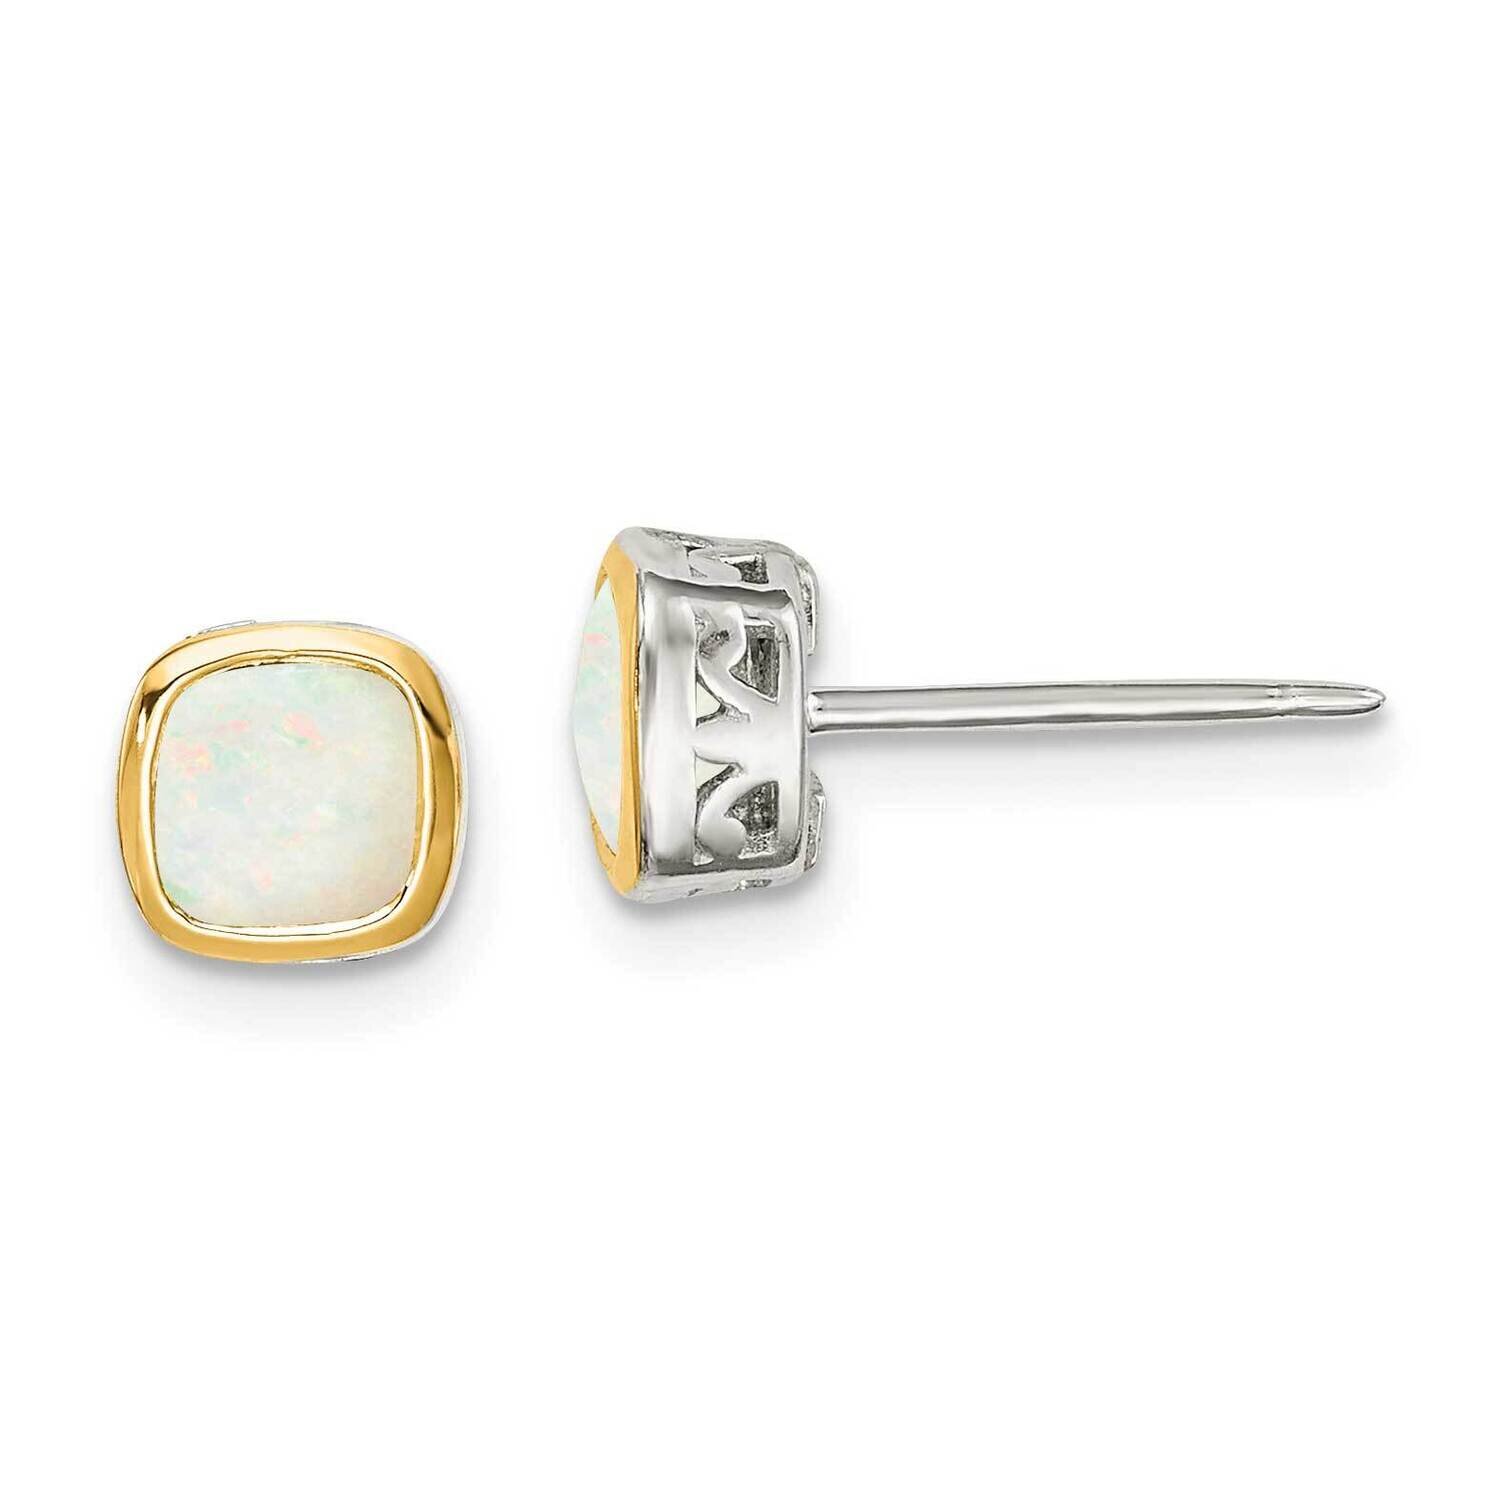 Milky Opal Square Stud Earrings Sterling Silver with 14k Gold Accent QTC1727